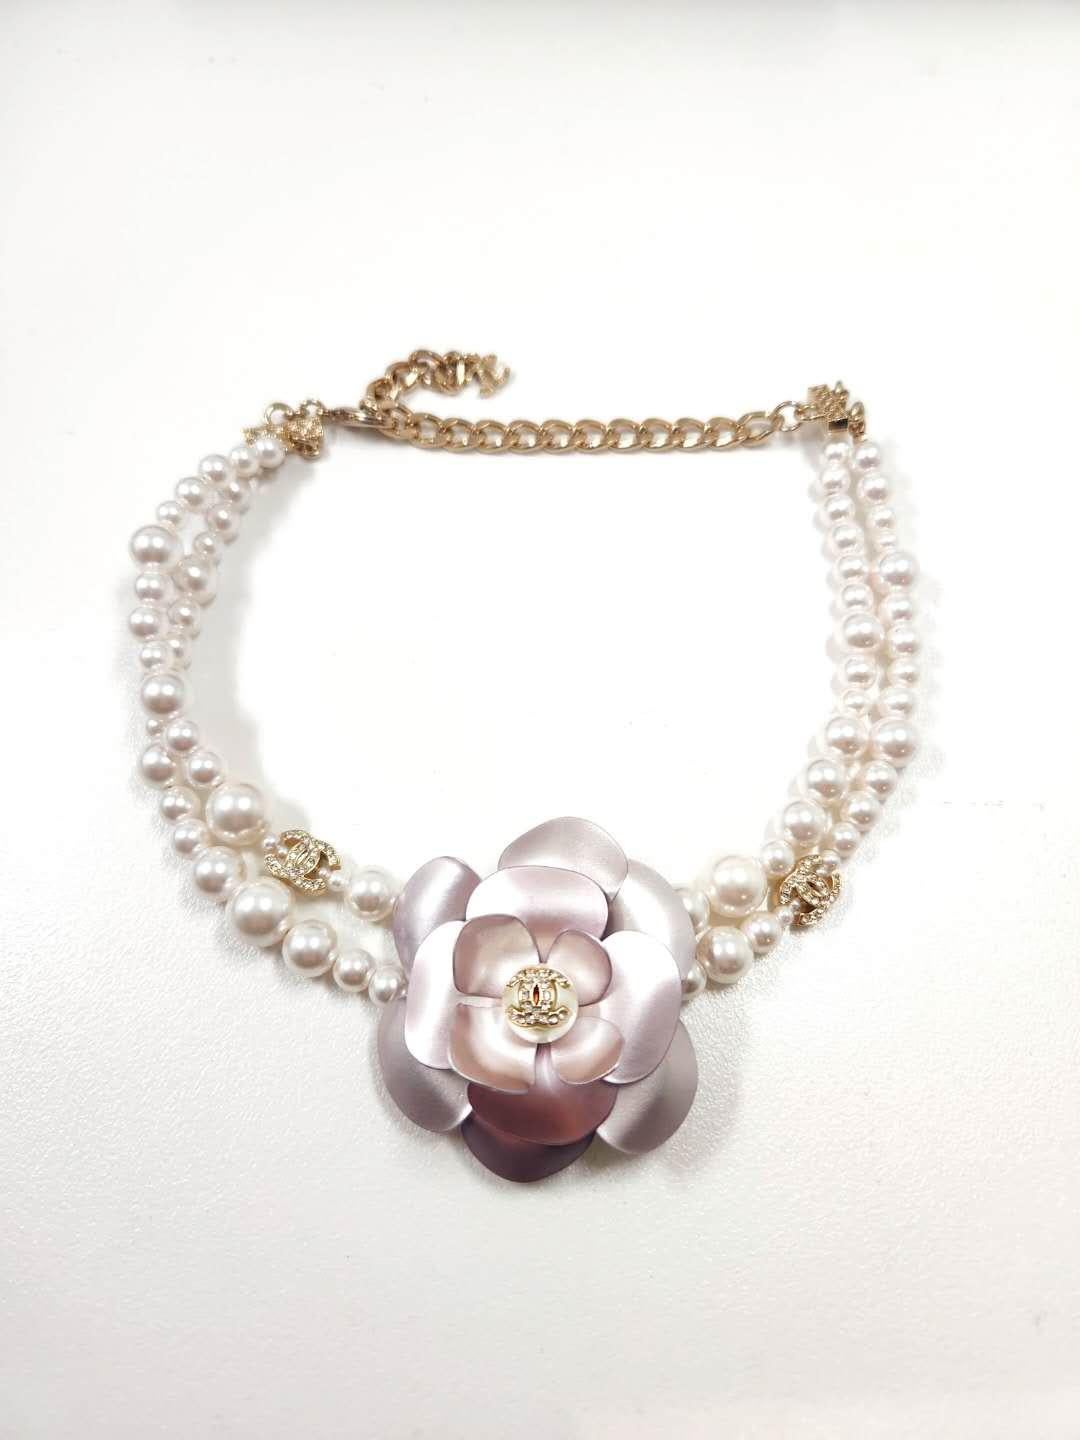 Introducing the breathtaking CHANEL 2023 Camellia Double Layer Pearl Choker Necklace with Rhinestone CC center, a masterpiece that encapsulates the essence of Chanel's timeless elegance and iconic design. This exquisite necklace effortlessly